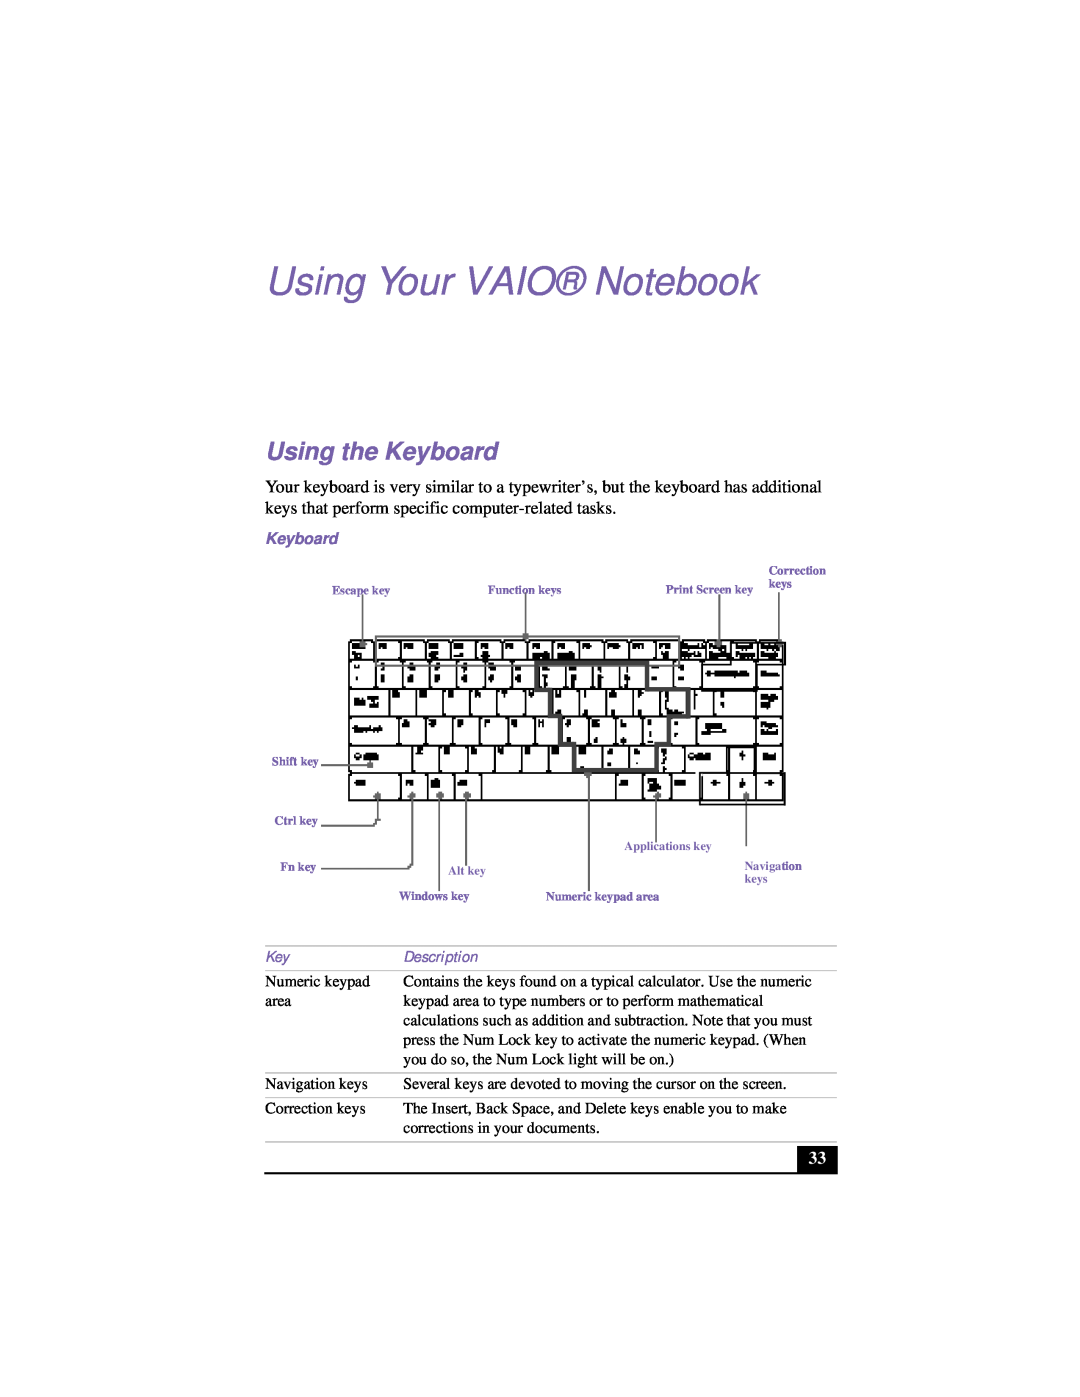 Sony PCG-FX120K, PCG-FX150K, PCG-FX140K, PCG-FX190, PCG-FX170 Using Your VAIO Notebook, Using the Keyboard, Description 